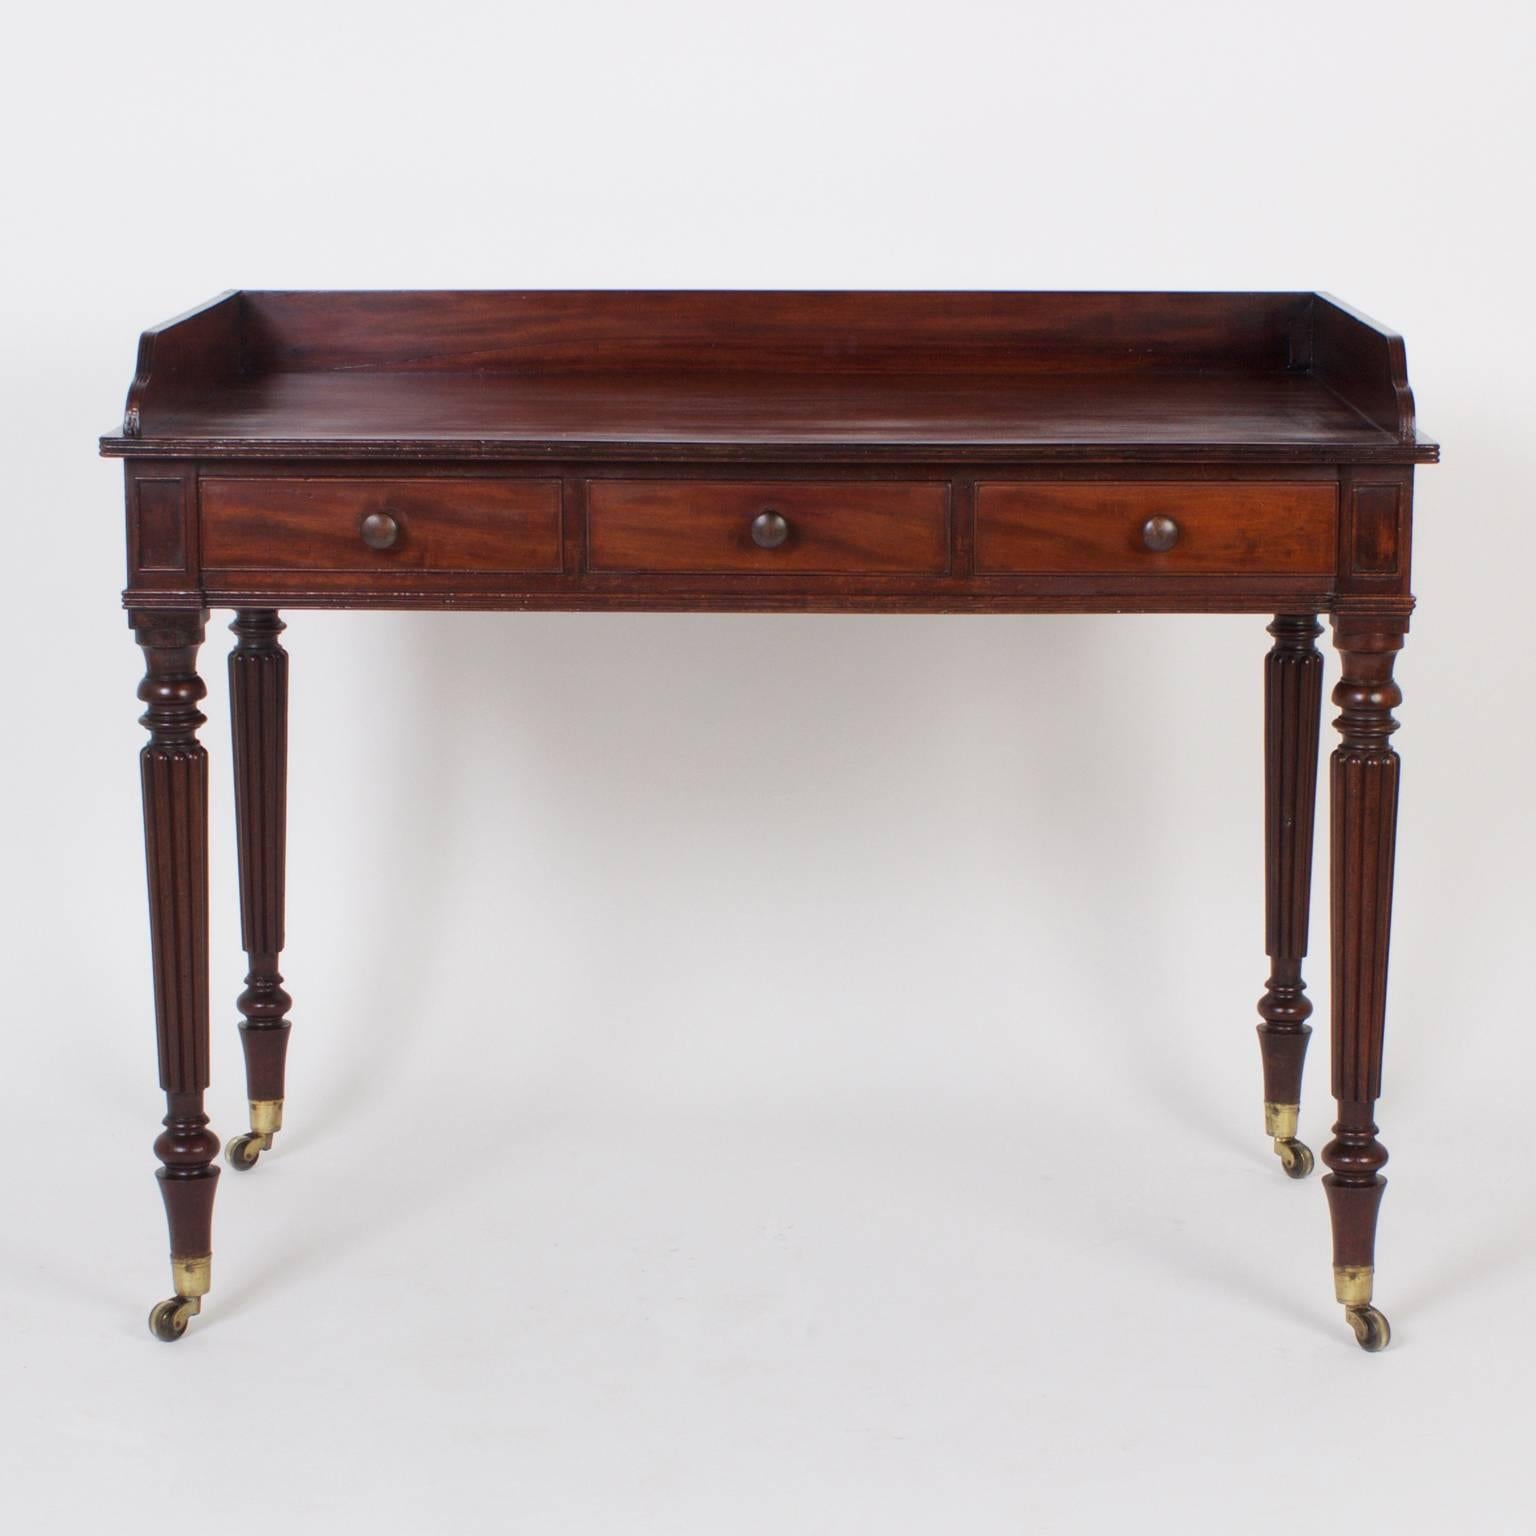 Fine, antique English server or bar expertly crafted with mahogany. Featuring single construction on top, a simple gallery, three storage drawers, elegant turned and reeded legs all on brass casters. Perfect proportions and well grained woods